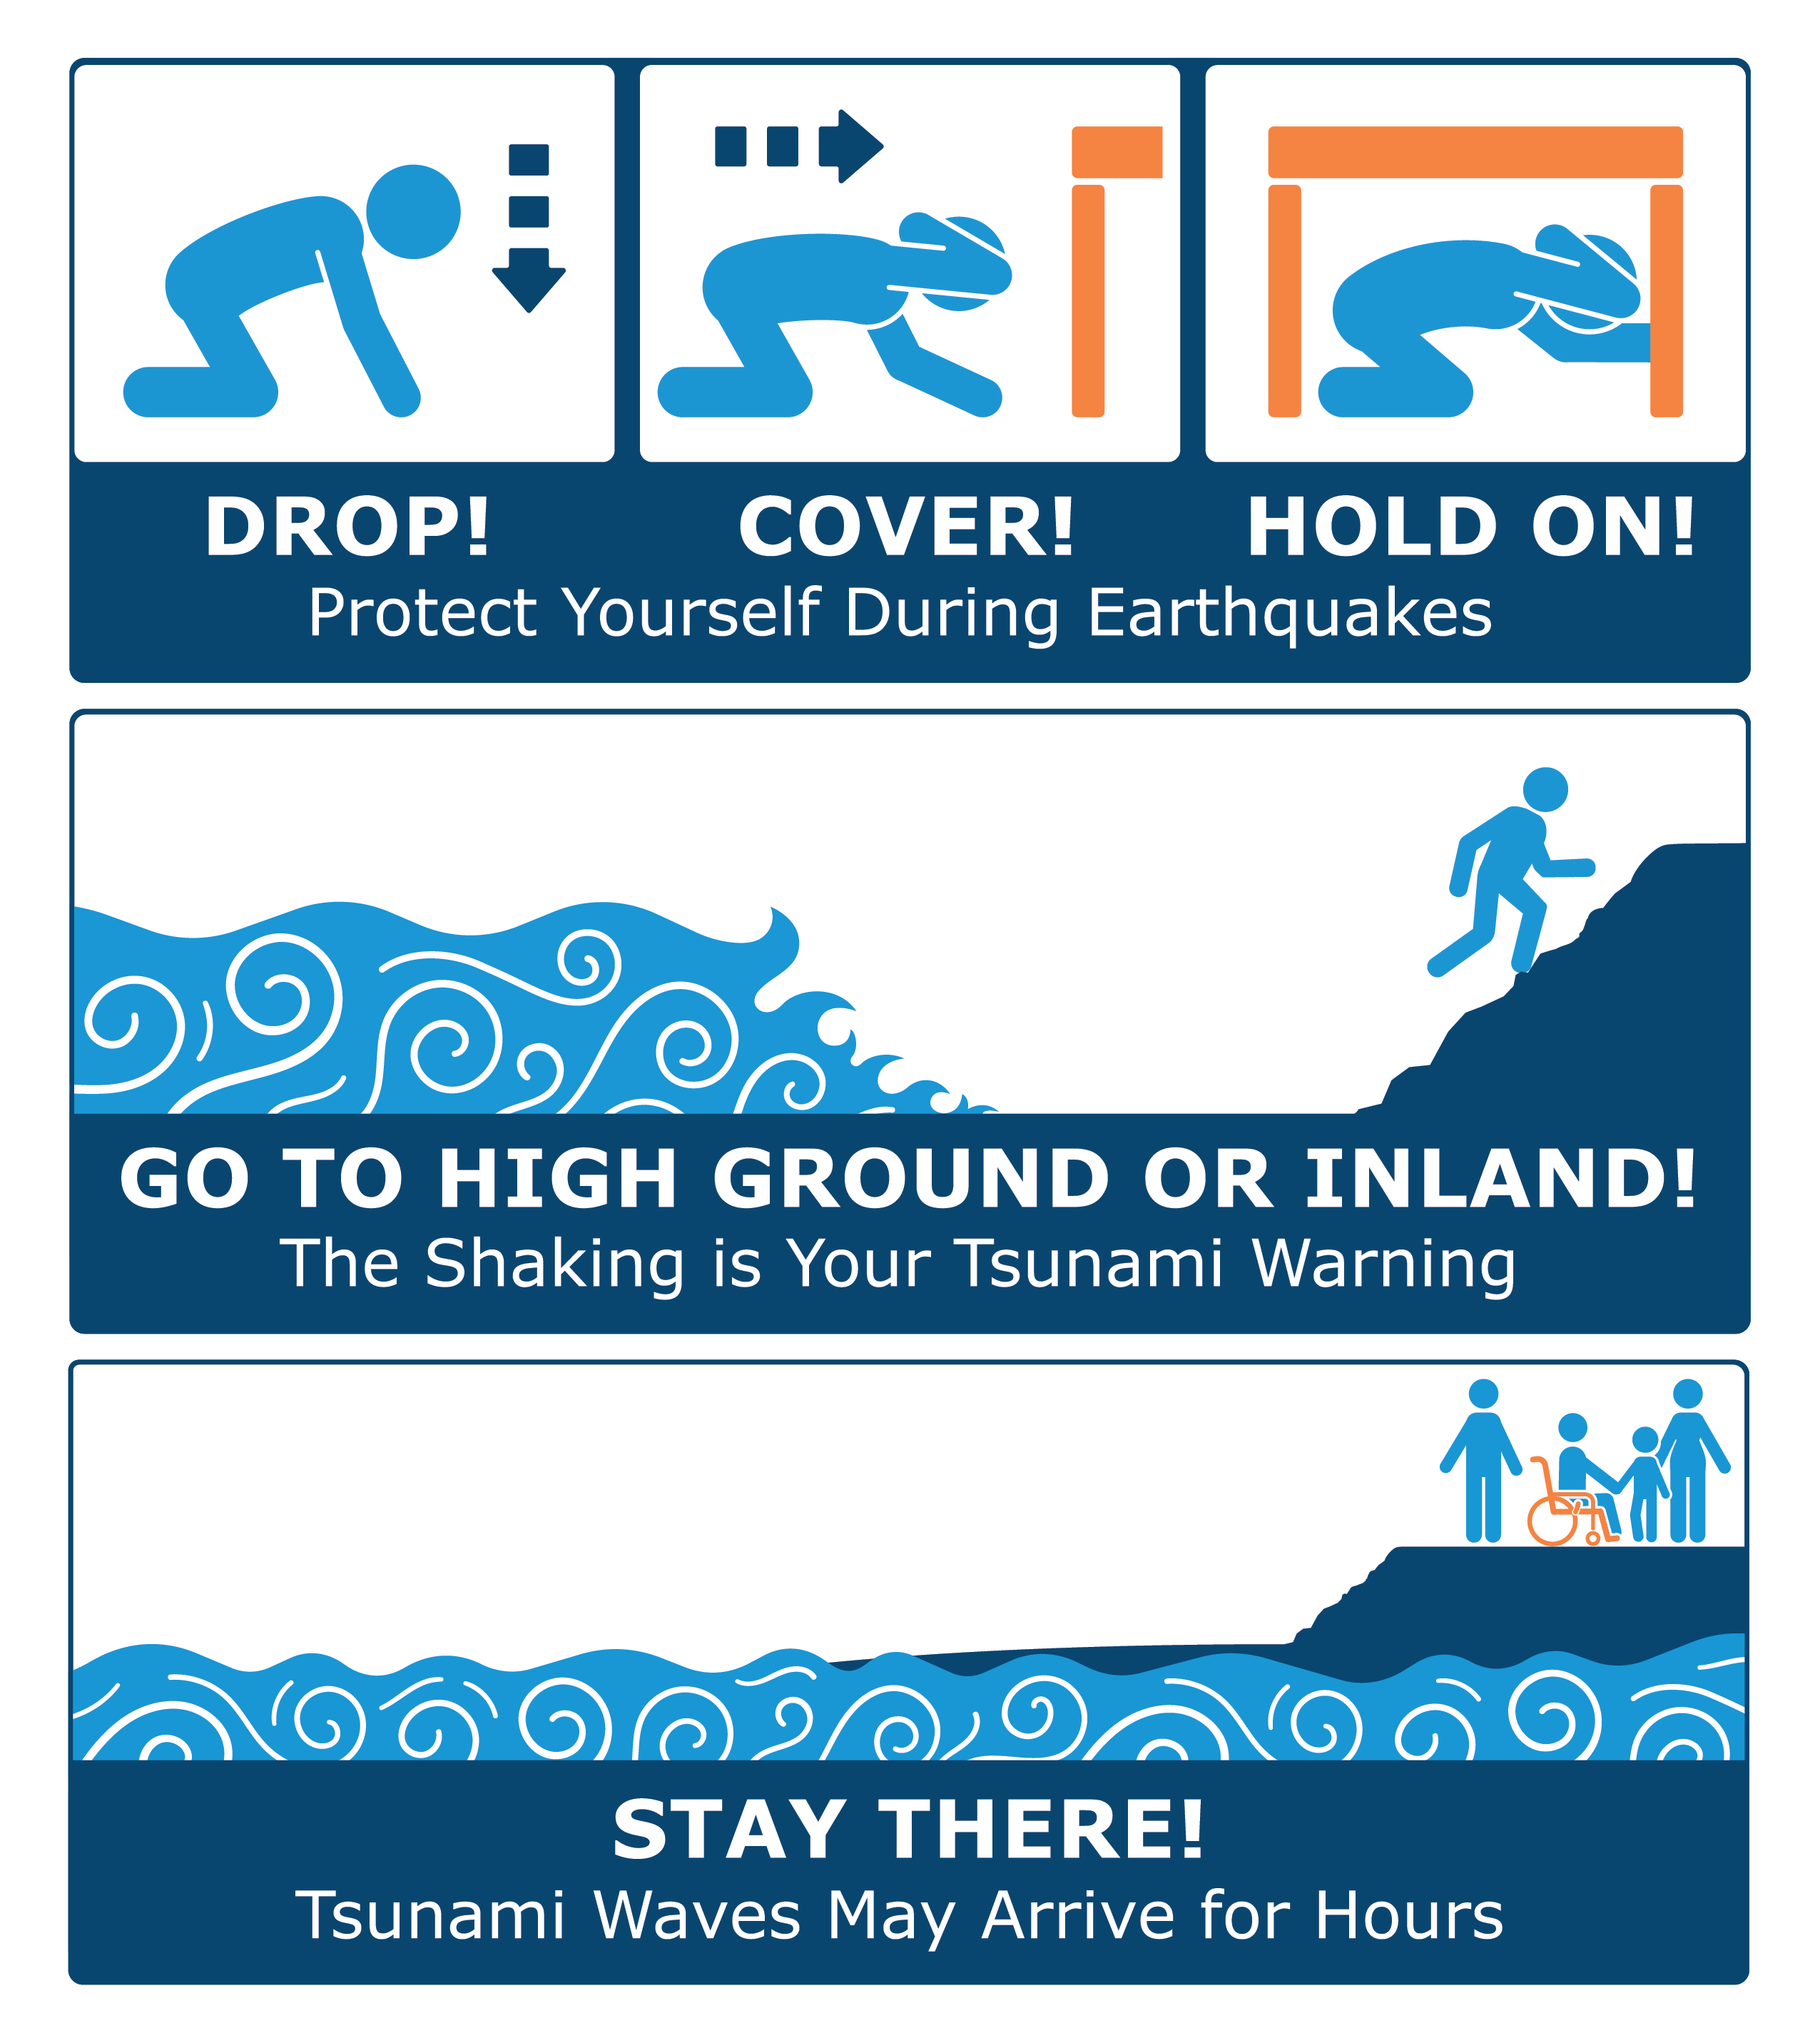 Graphic with instructions to Drop, Cover, and Hold on during earthquakes, then Get to High Ground when a tsunami is imminent, and then to Stay There as tsunami waves may arrive for hours